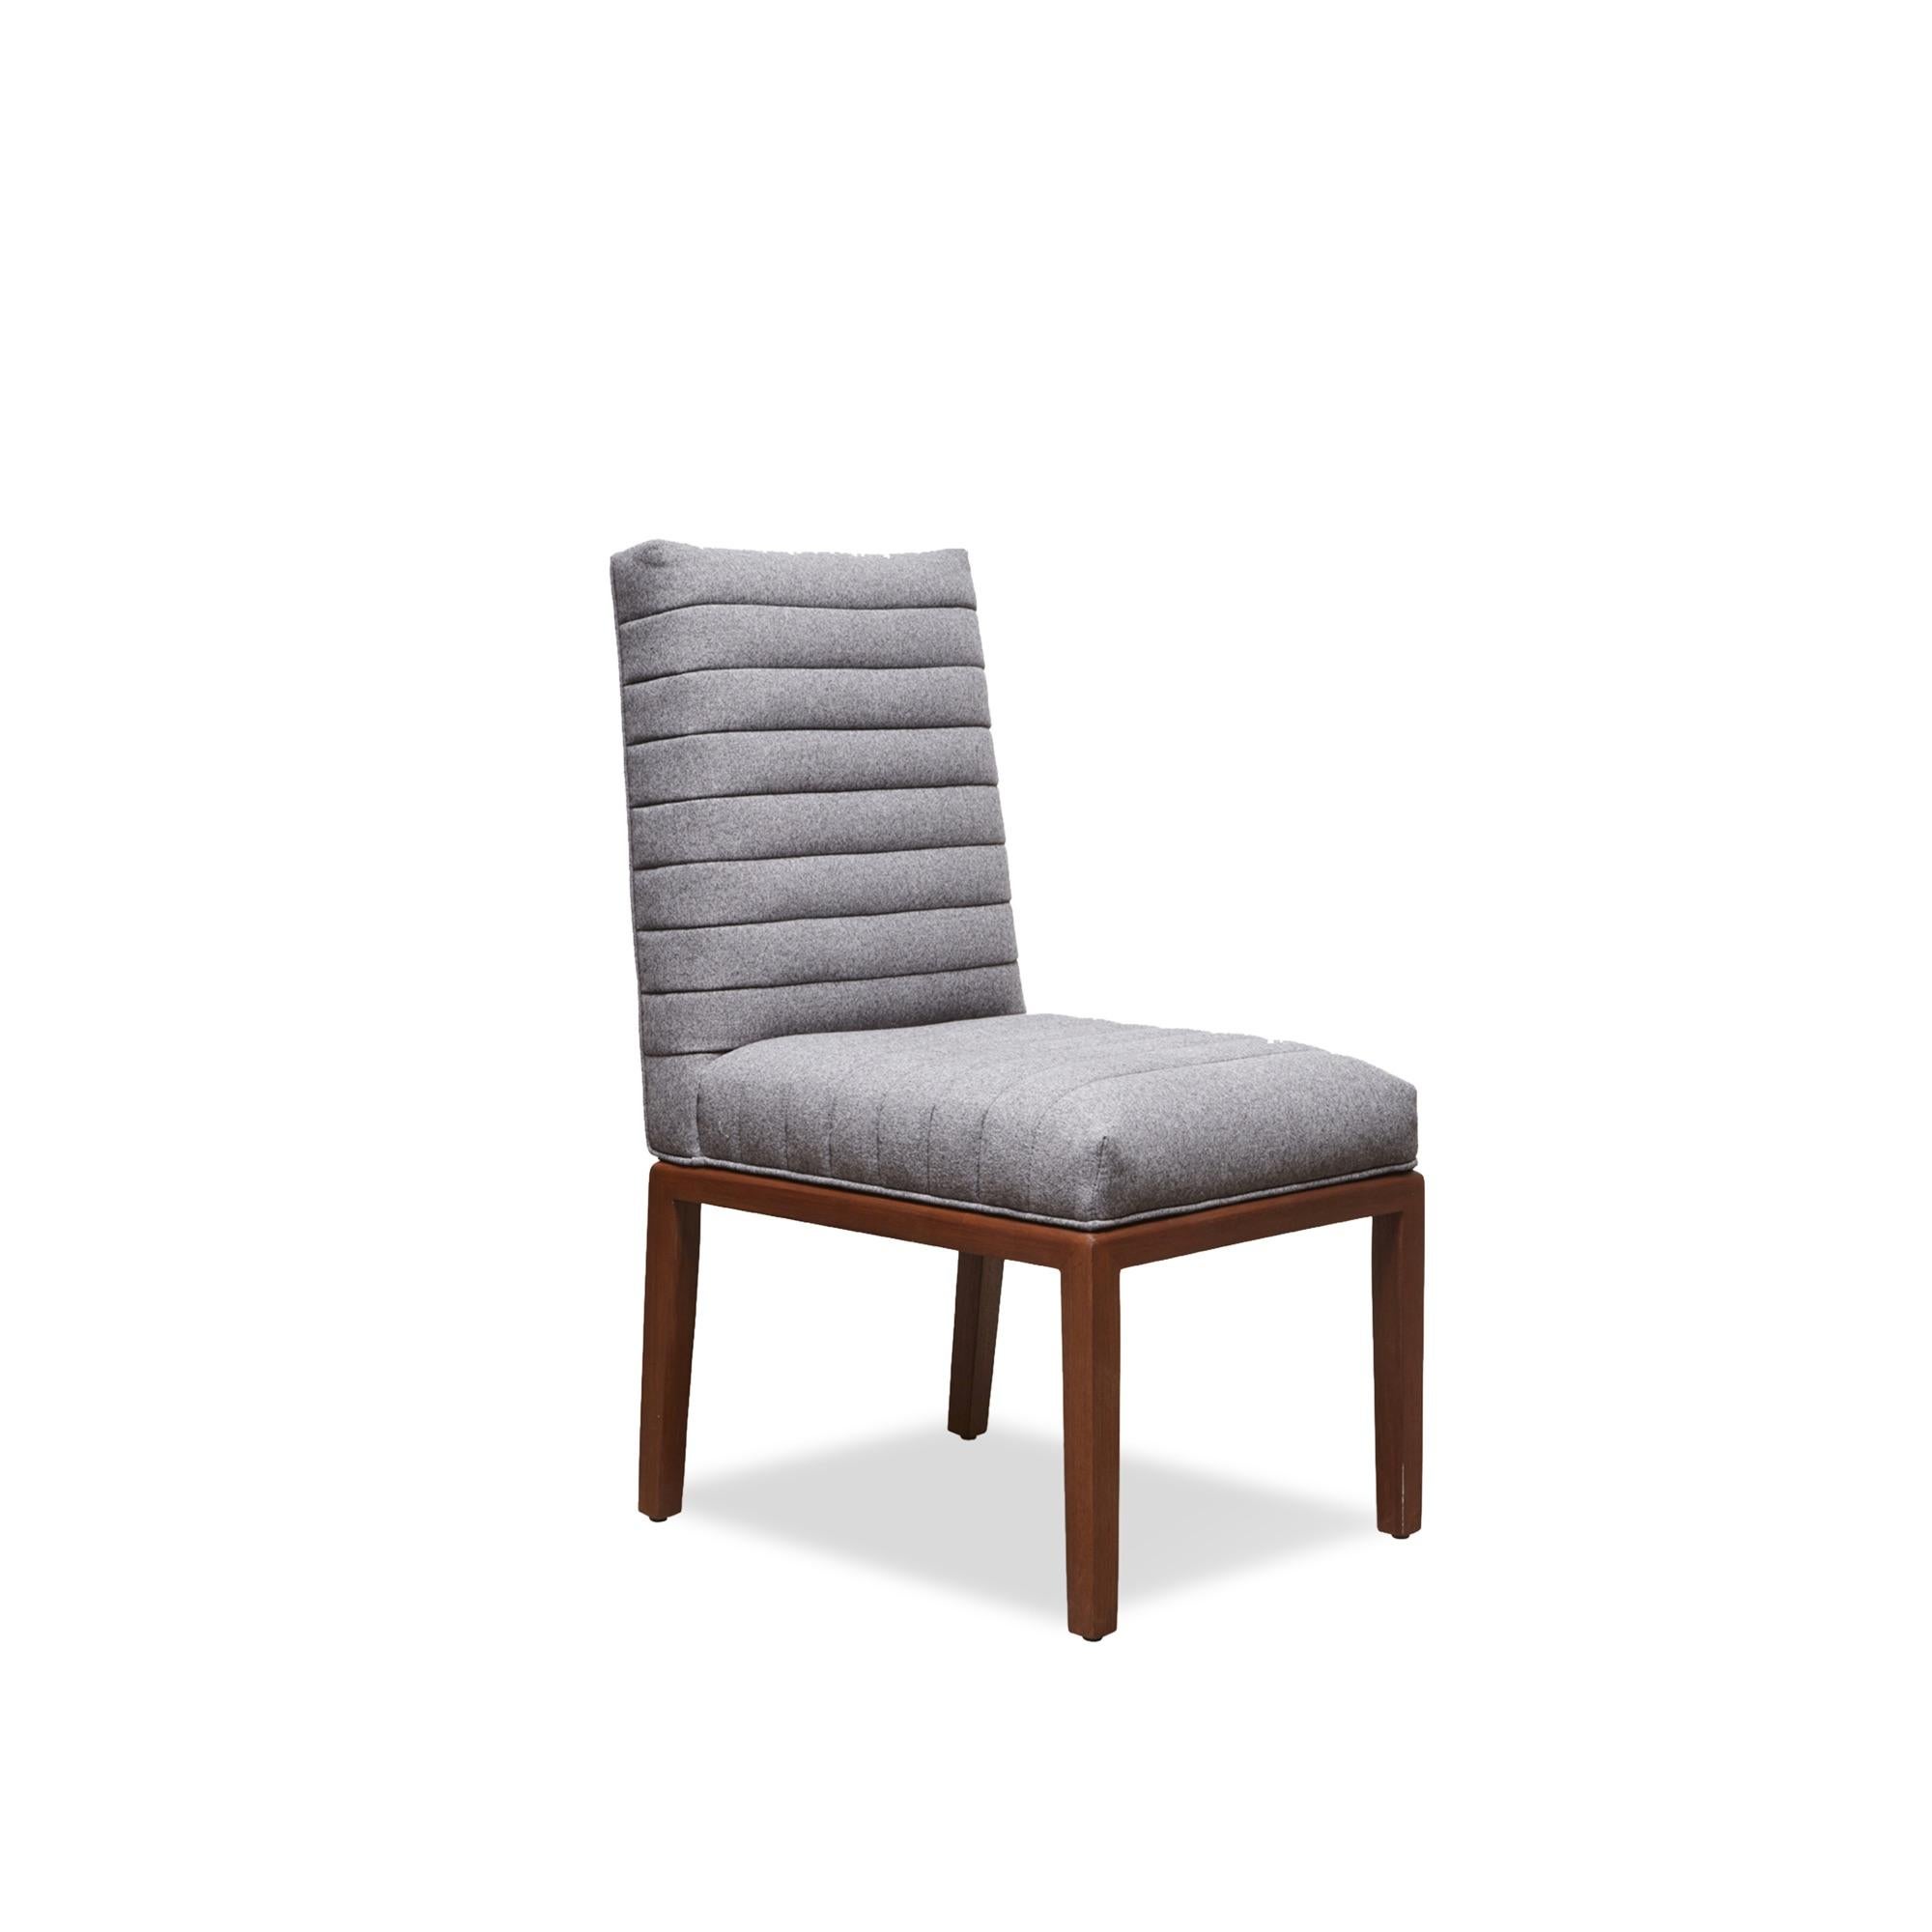 The highback shoreland chair is part of the collaborative collection with interior designer Brian Paquette. The dining chair features a channel tufted back and seat with a solid American walnut or white oak frame. This piece is available in